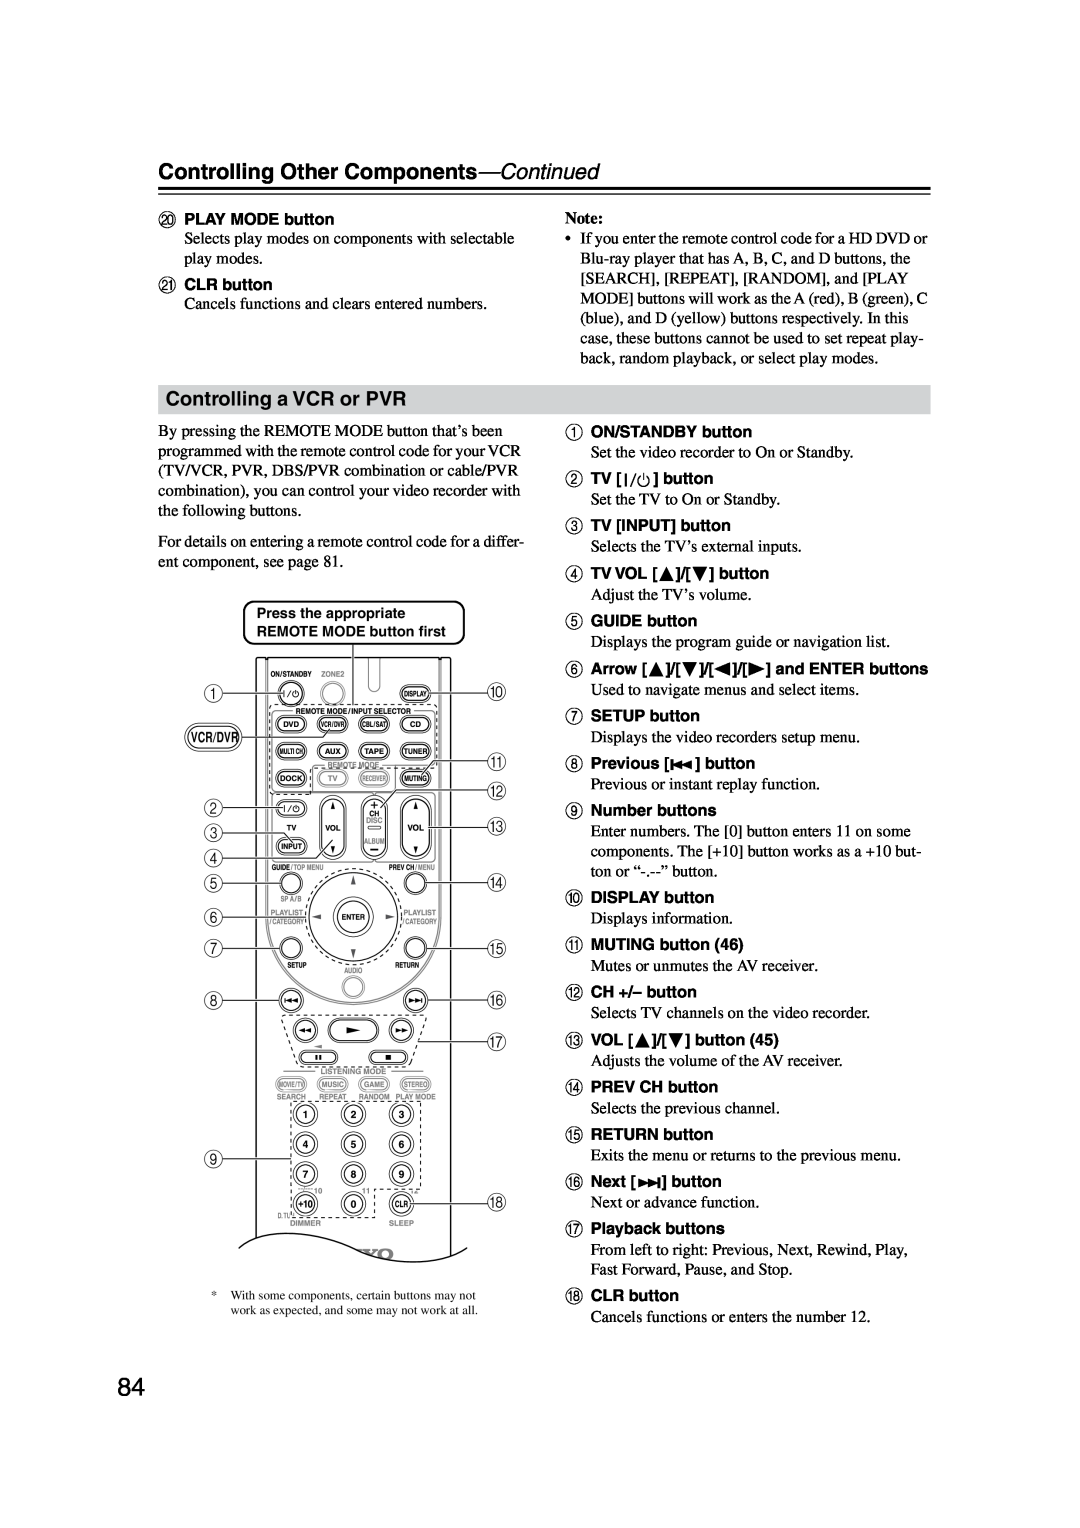 Onkyo TX-SR506, TX-SR576 instruction manual Controlling a VCR or PVR, Controlling Other Components—Continued 